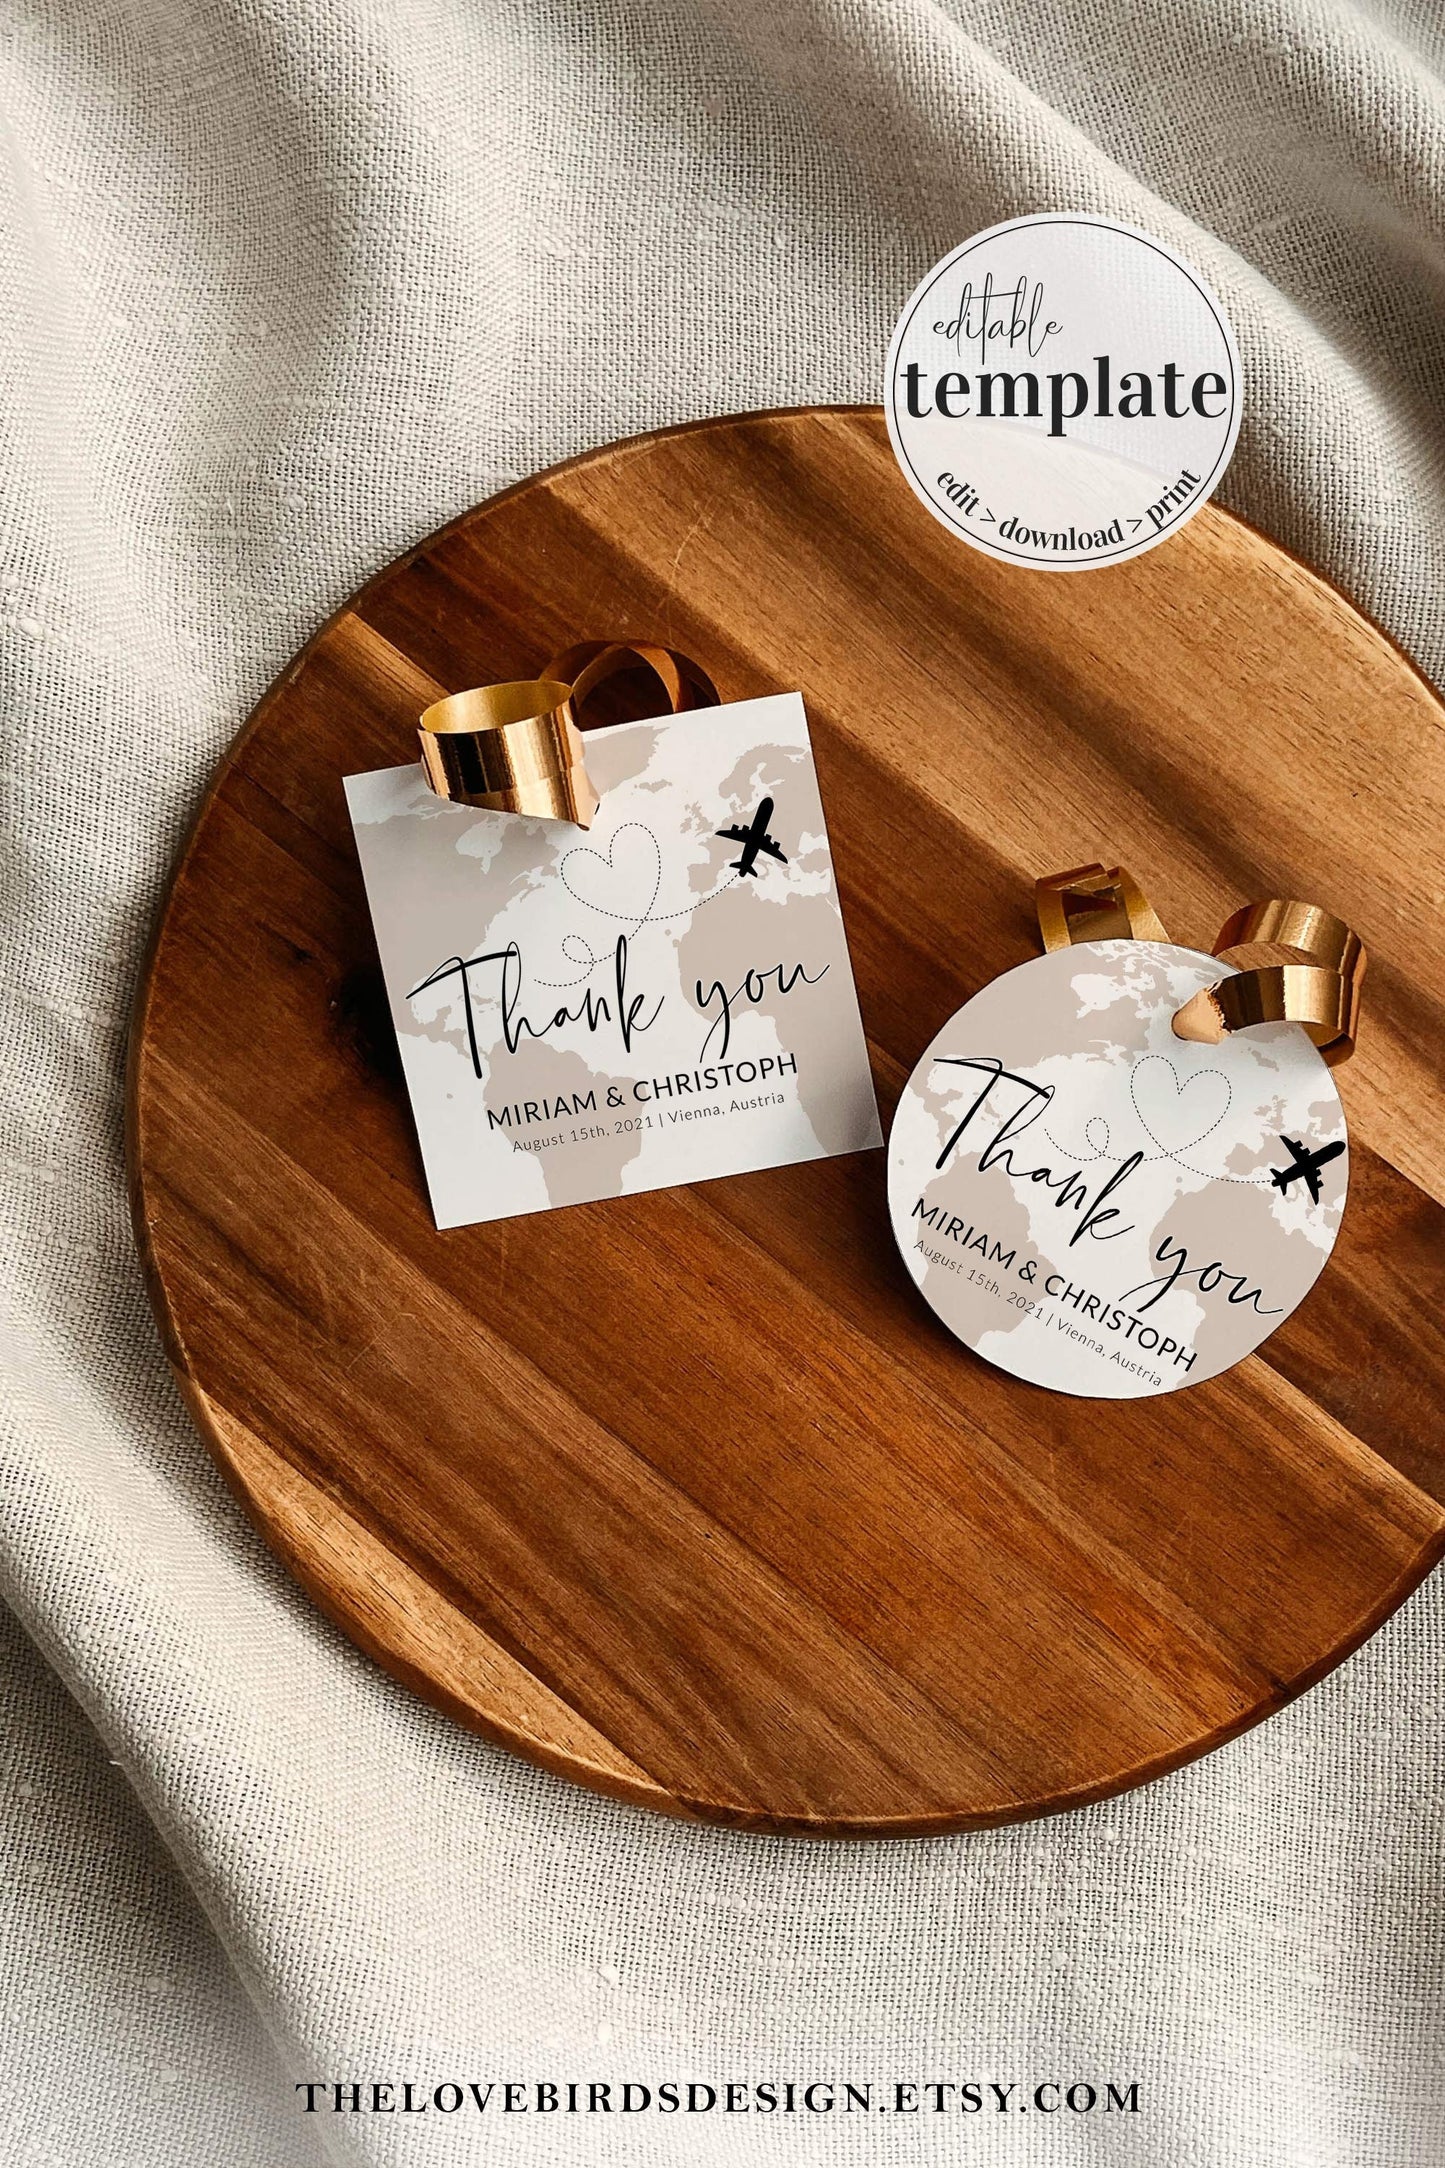 Destination Wedding Favor Tags Template to Download, Favor Tags for travel themed wedding, bridal shower or baby shower #072w